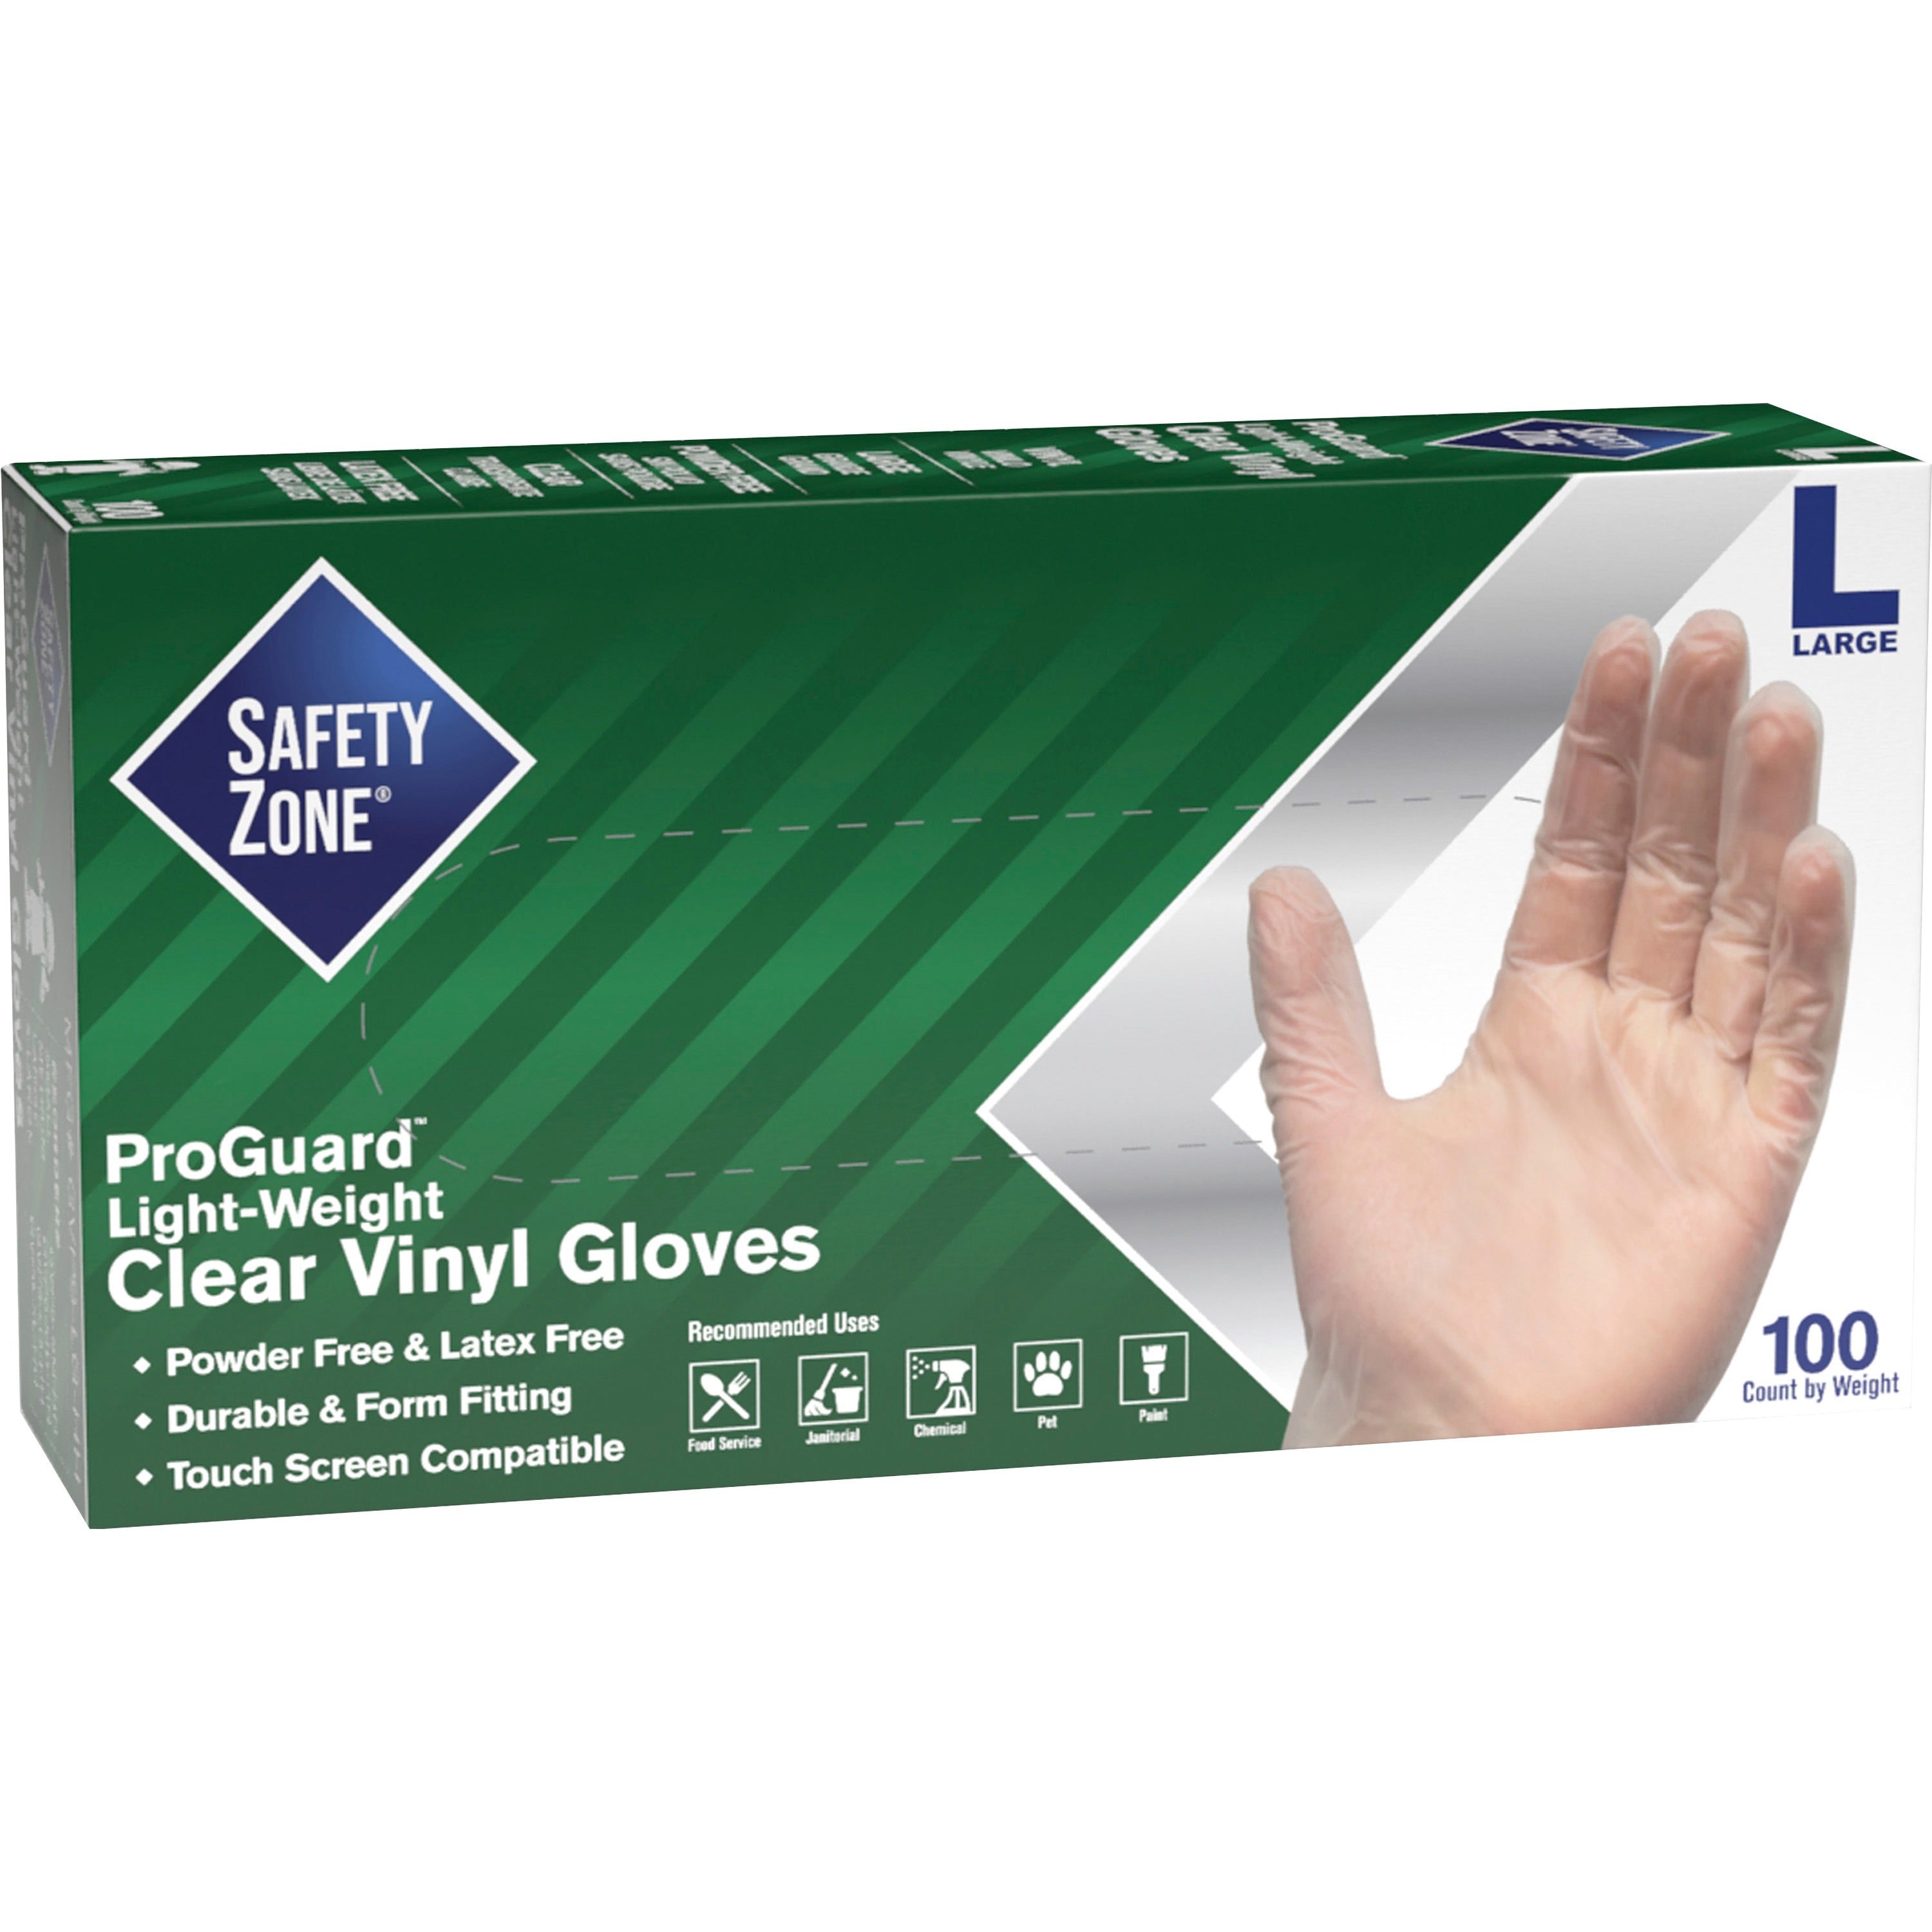 safety-zone-powder-free-clear-vinyl-gloves-large-size-clear-latex-free-dehp-free-dinp-free-pfas-free-comfortable-silicone-free-for-janitorial-use-cosmetics-painting-cleaning-general-purpose-pet-care-100-box-925-glove-length_szngvp9lghh - 1